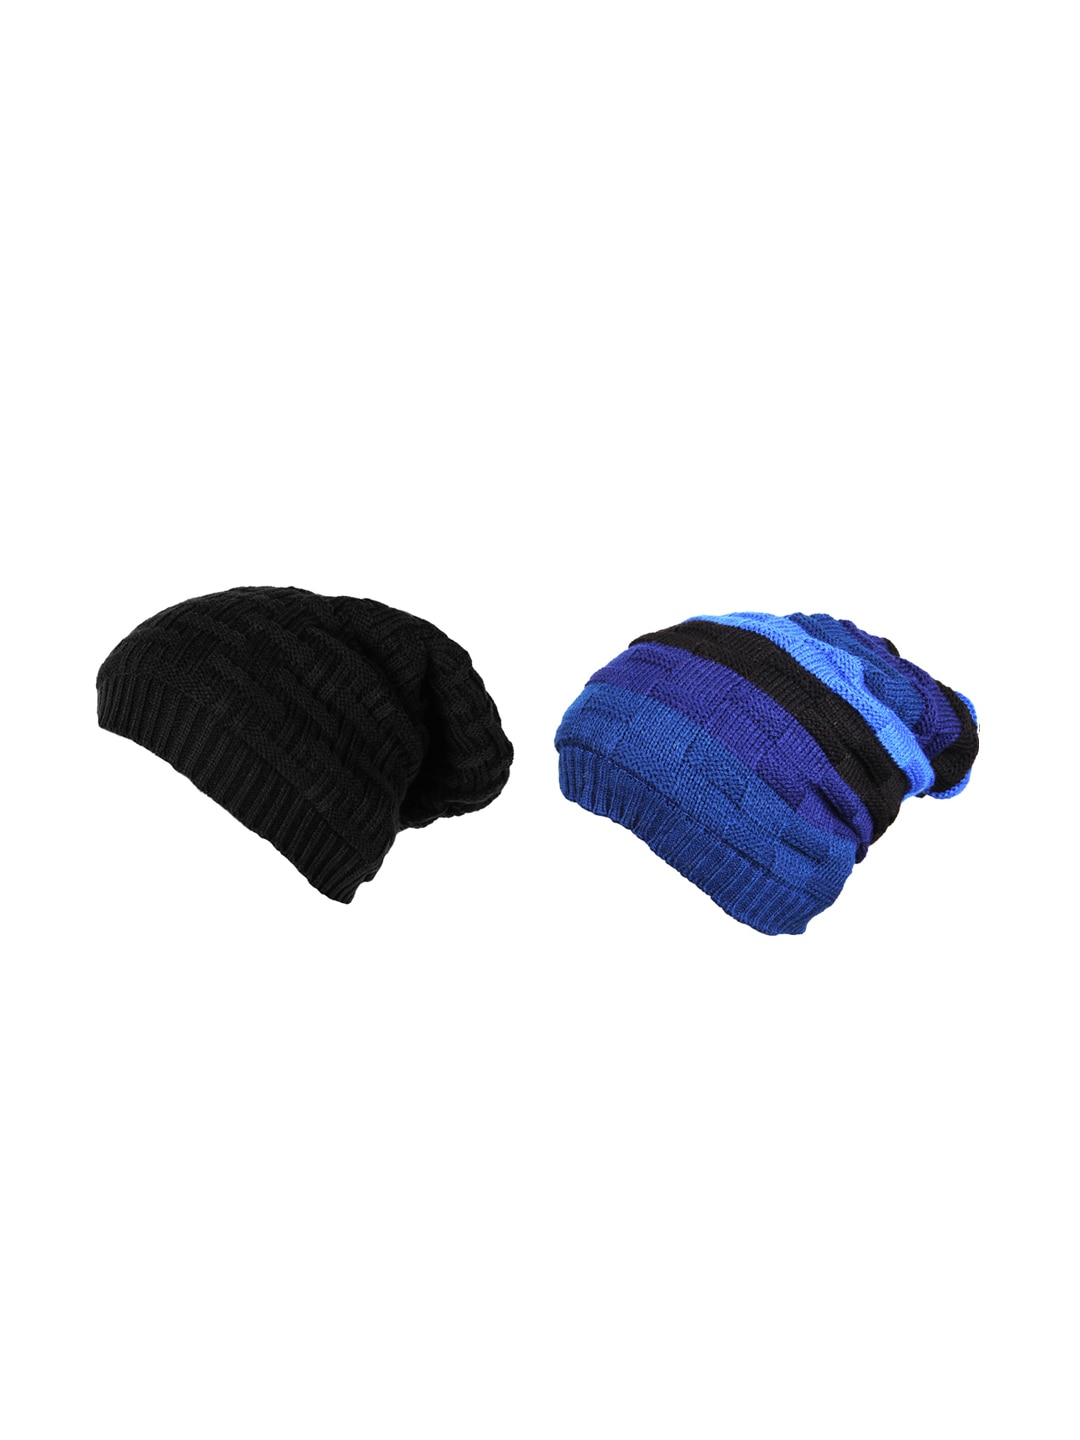 Knotyy Pack of 2 Unisex Blue & Black Colourblocked Beanie Price in India